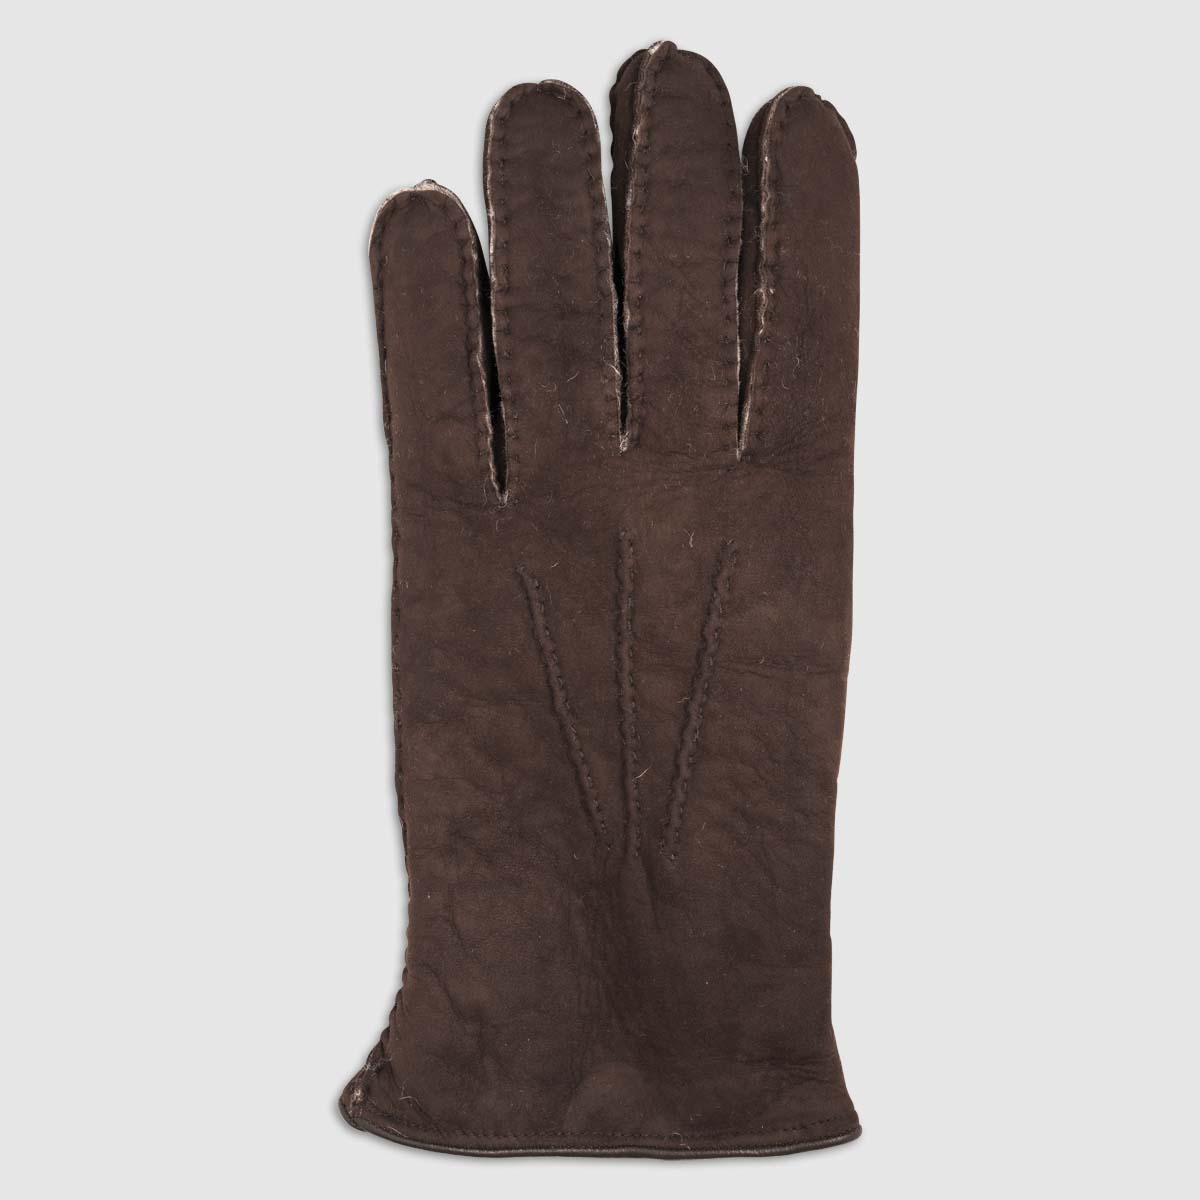 Leather Glove with Shearling Lining in Brown Alpo Guanti on sale 2022